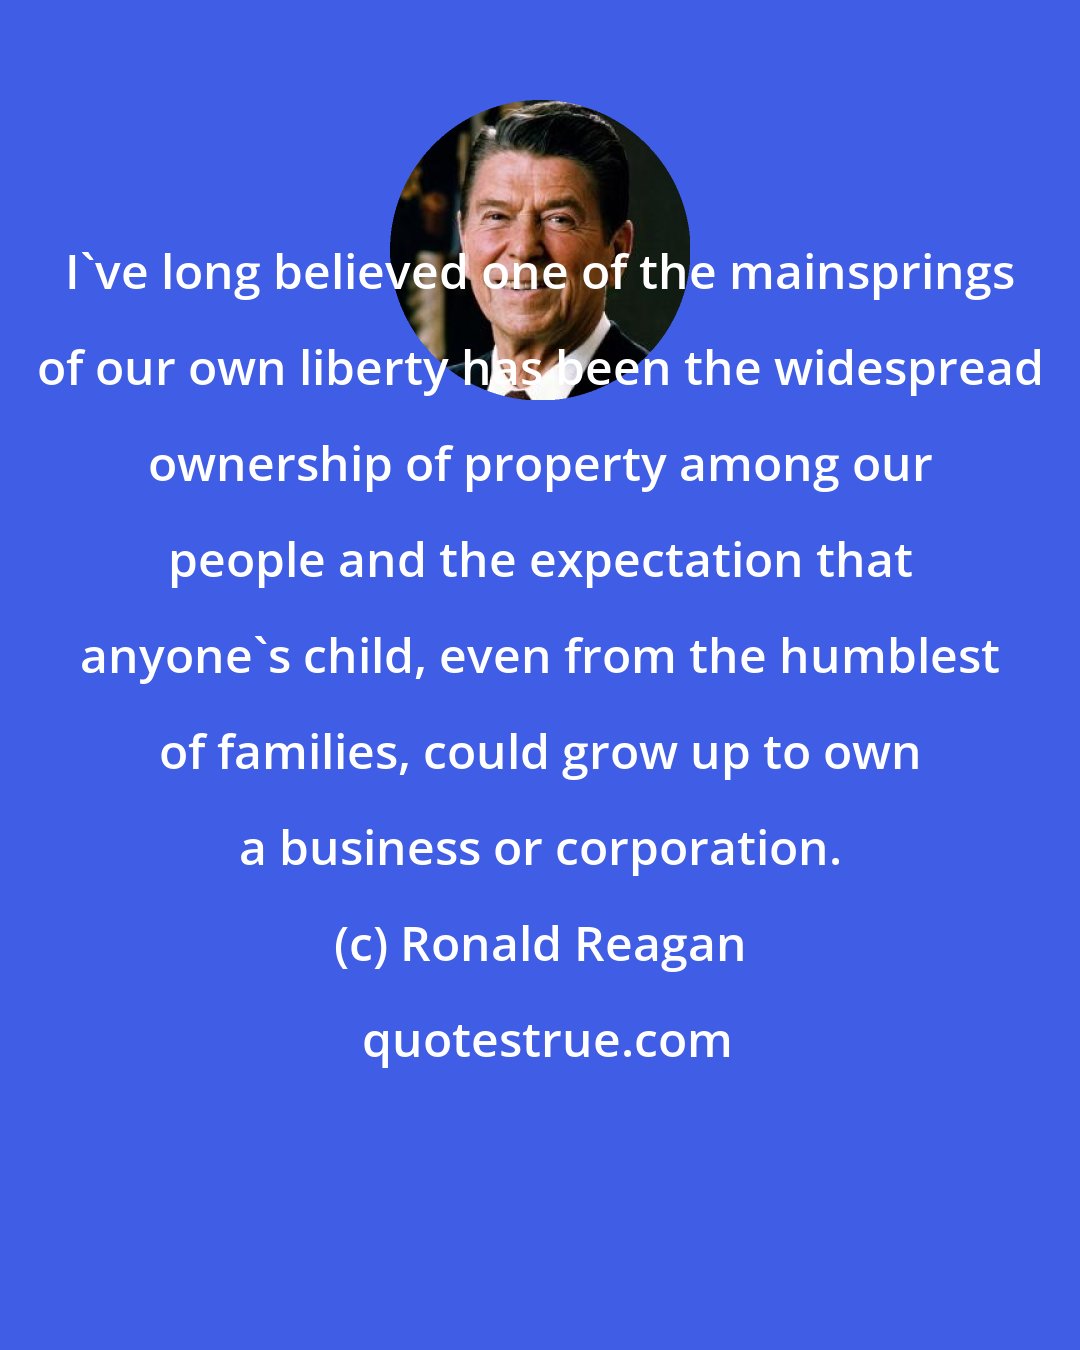 Ronald Reagan: I've long believed one of the mainsprings of our own liberty has been the widespread ownership of property among our people and the expectation that anyone's child, even from the humblest of families, could grow up to own a business or corporation.